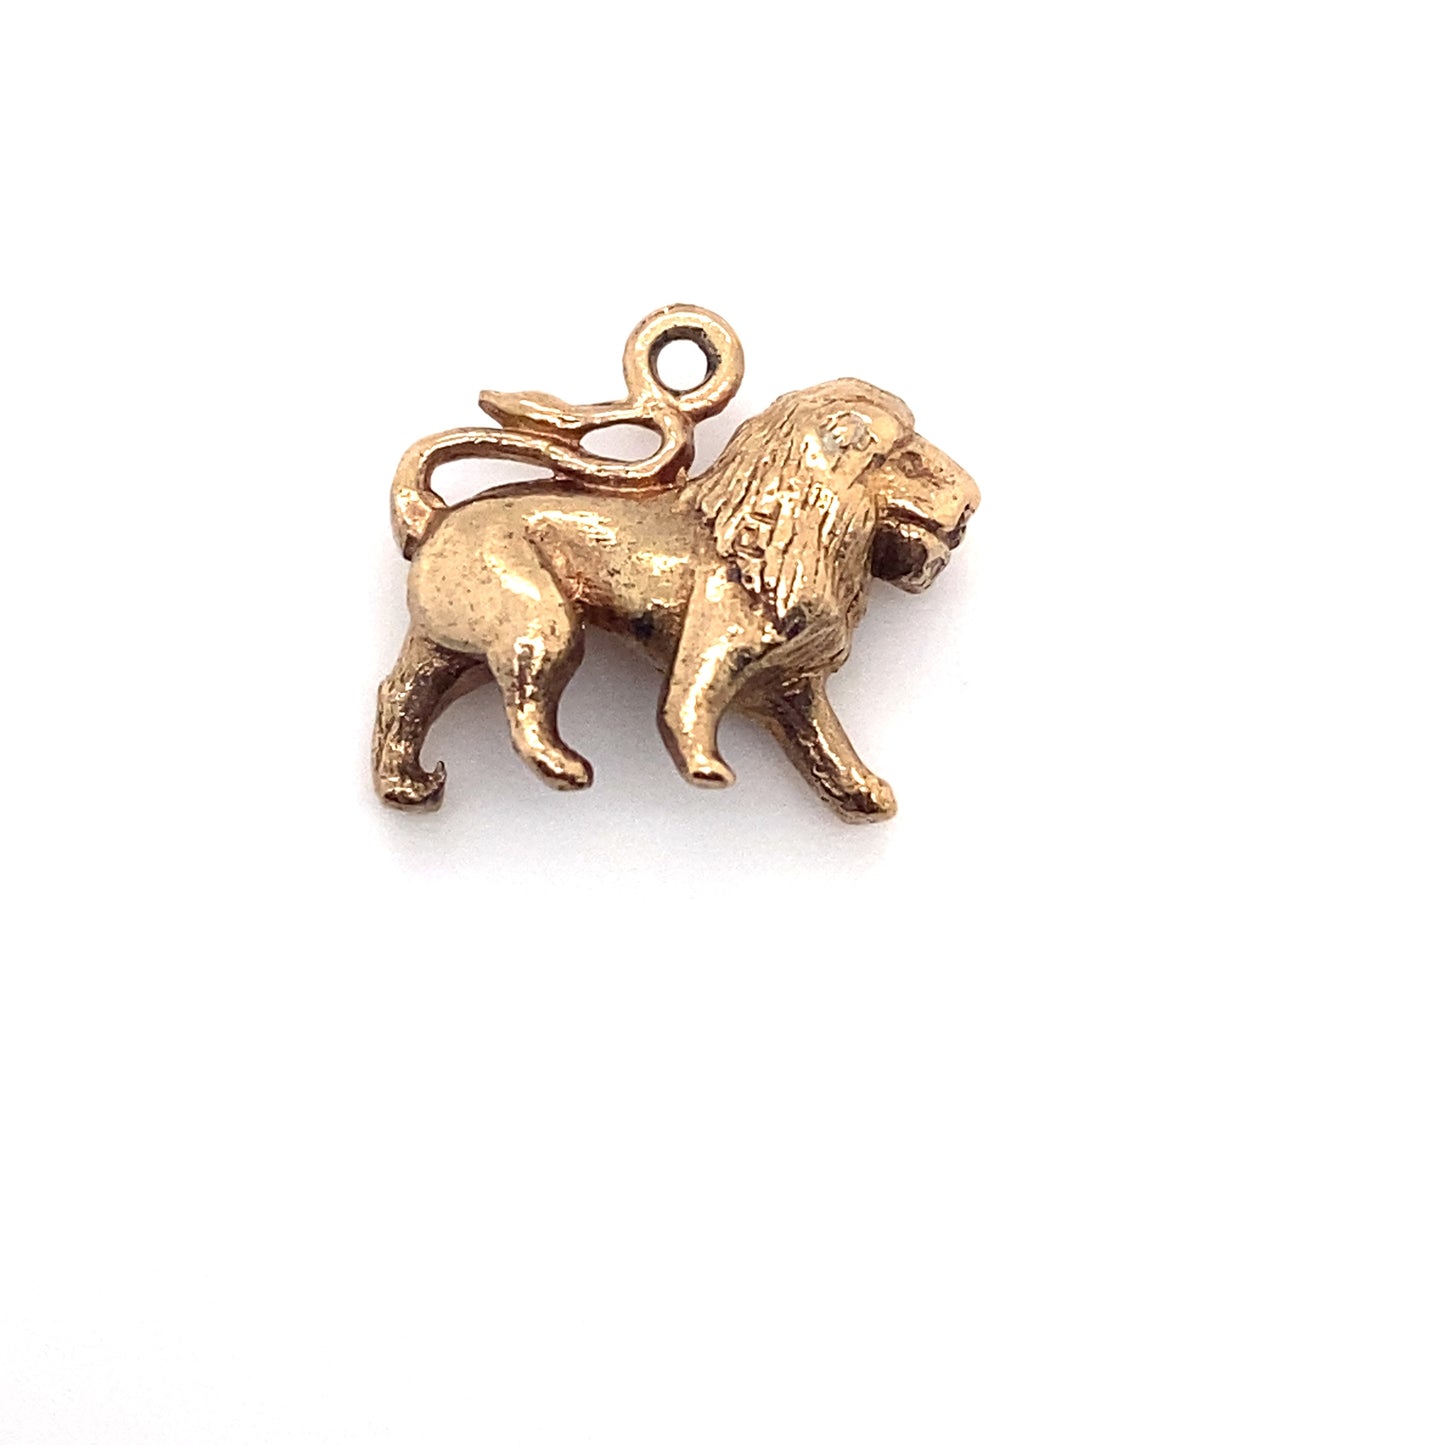 Circa 1920s English Lion Charm or Pendant in 9K Gold